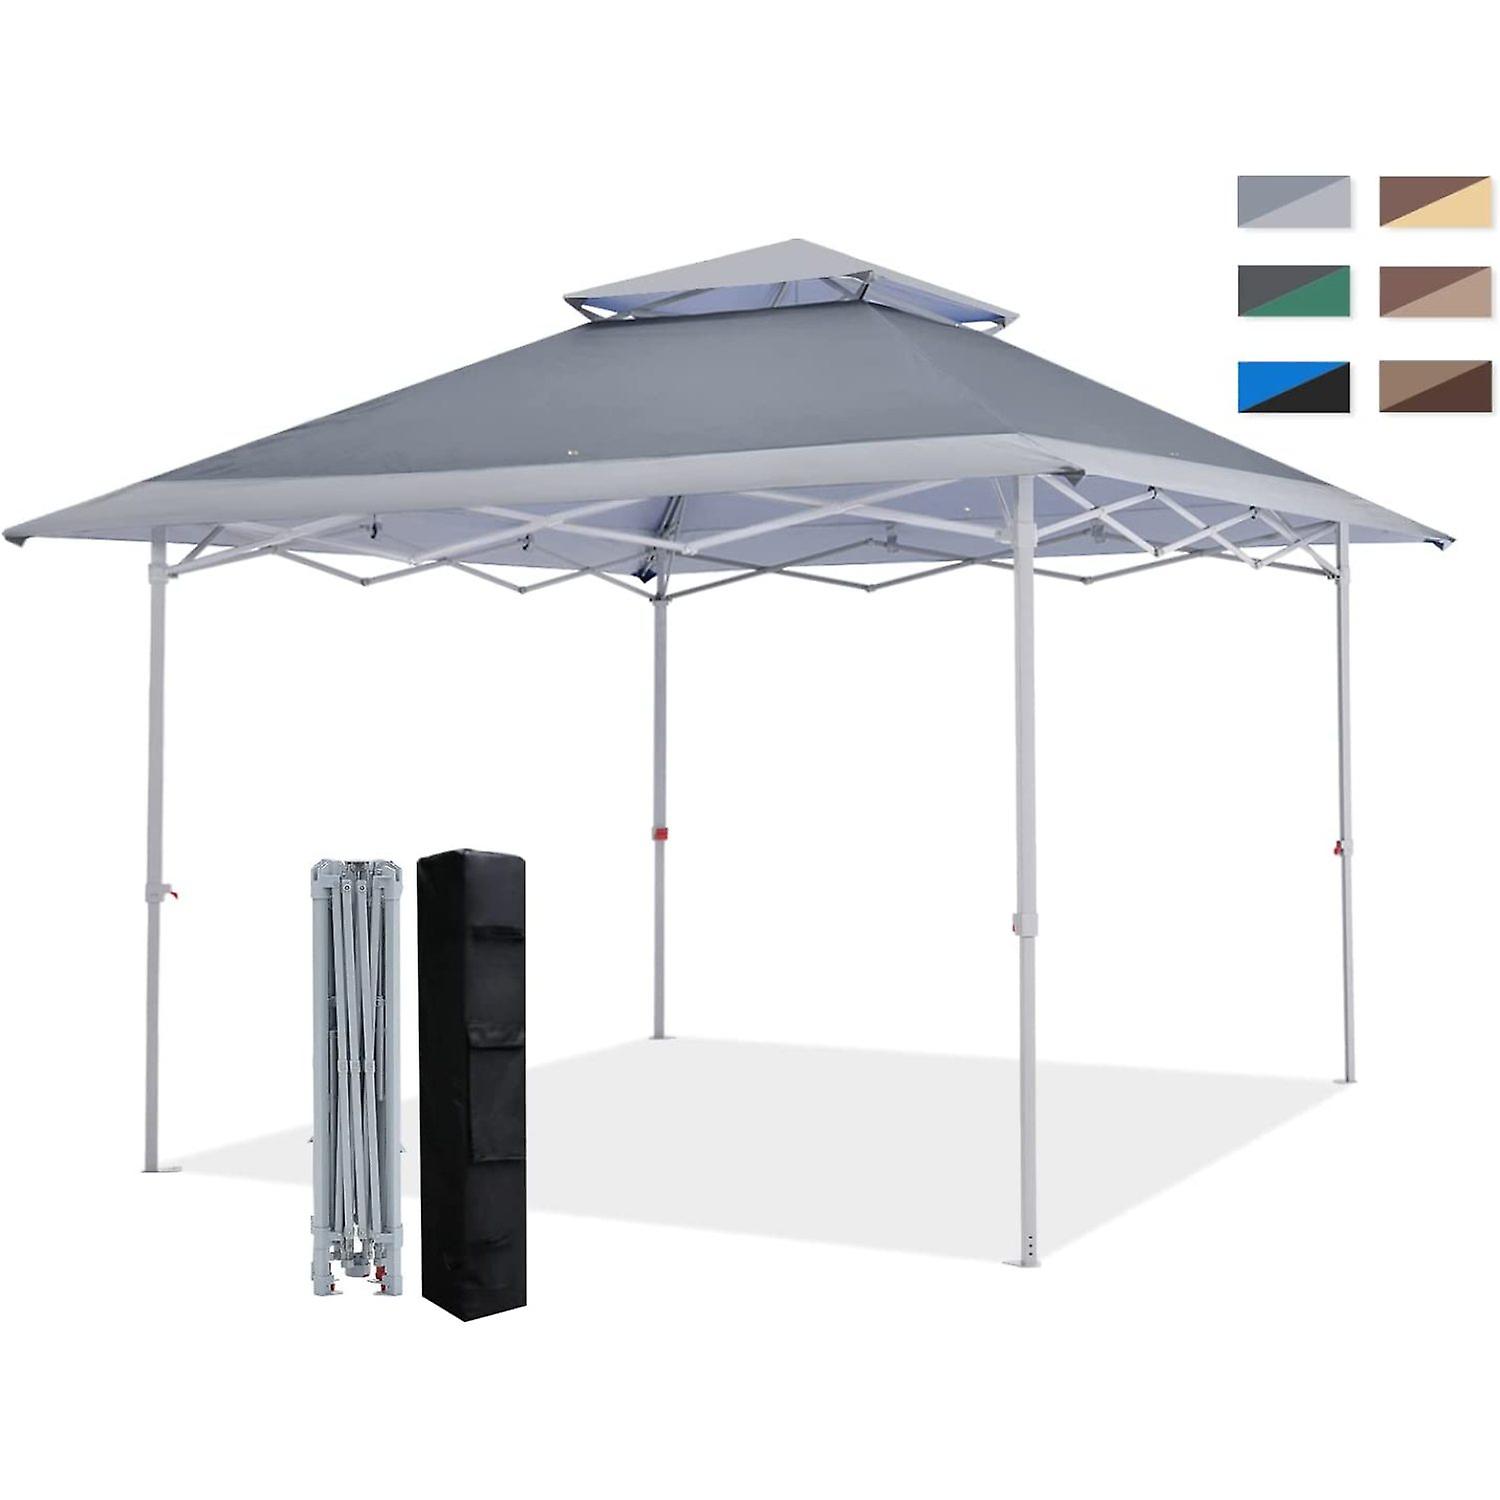 13x13ft Pop Up Canopy Tent Instant Folding Shelter 169 Square Feet Large Outdoor Sun Protection Shade(grey)